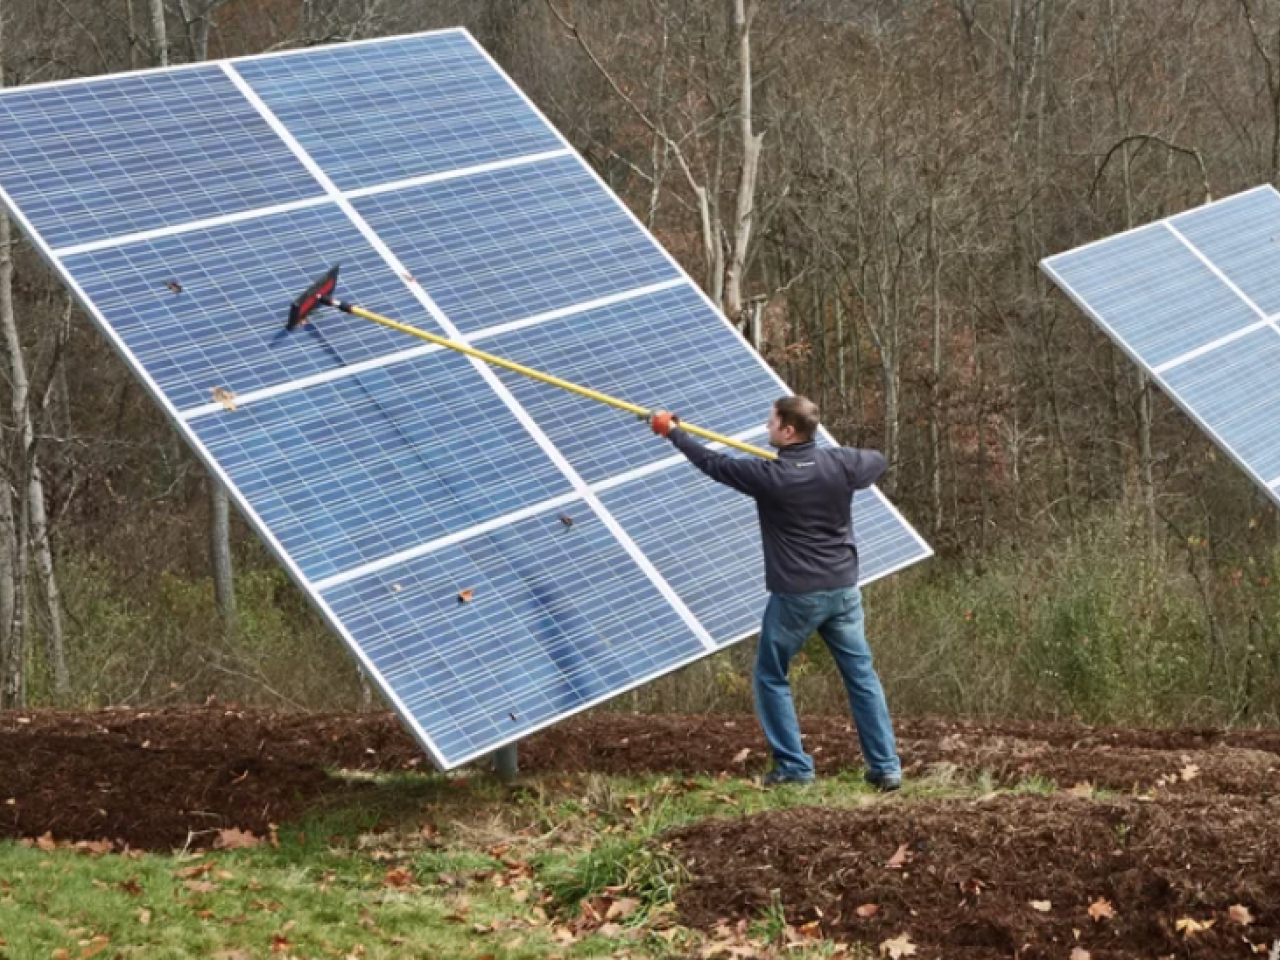 Chris Meyer cleans off the Solar panels at his home